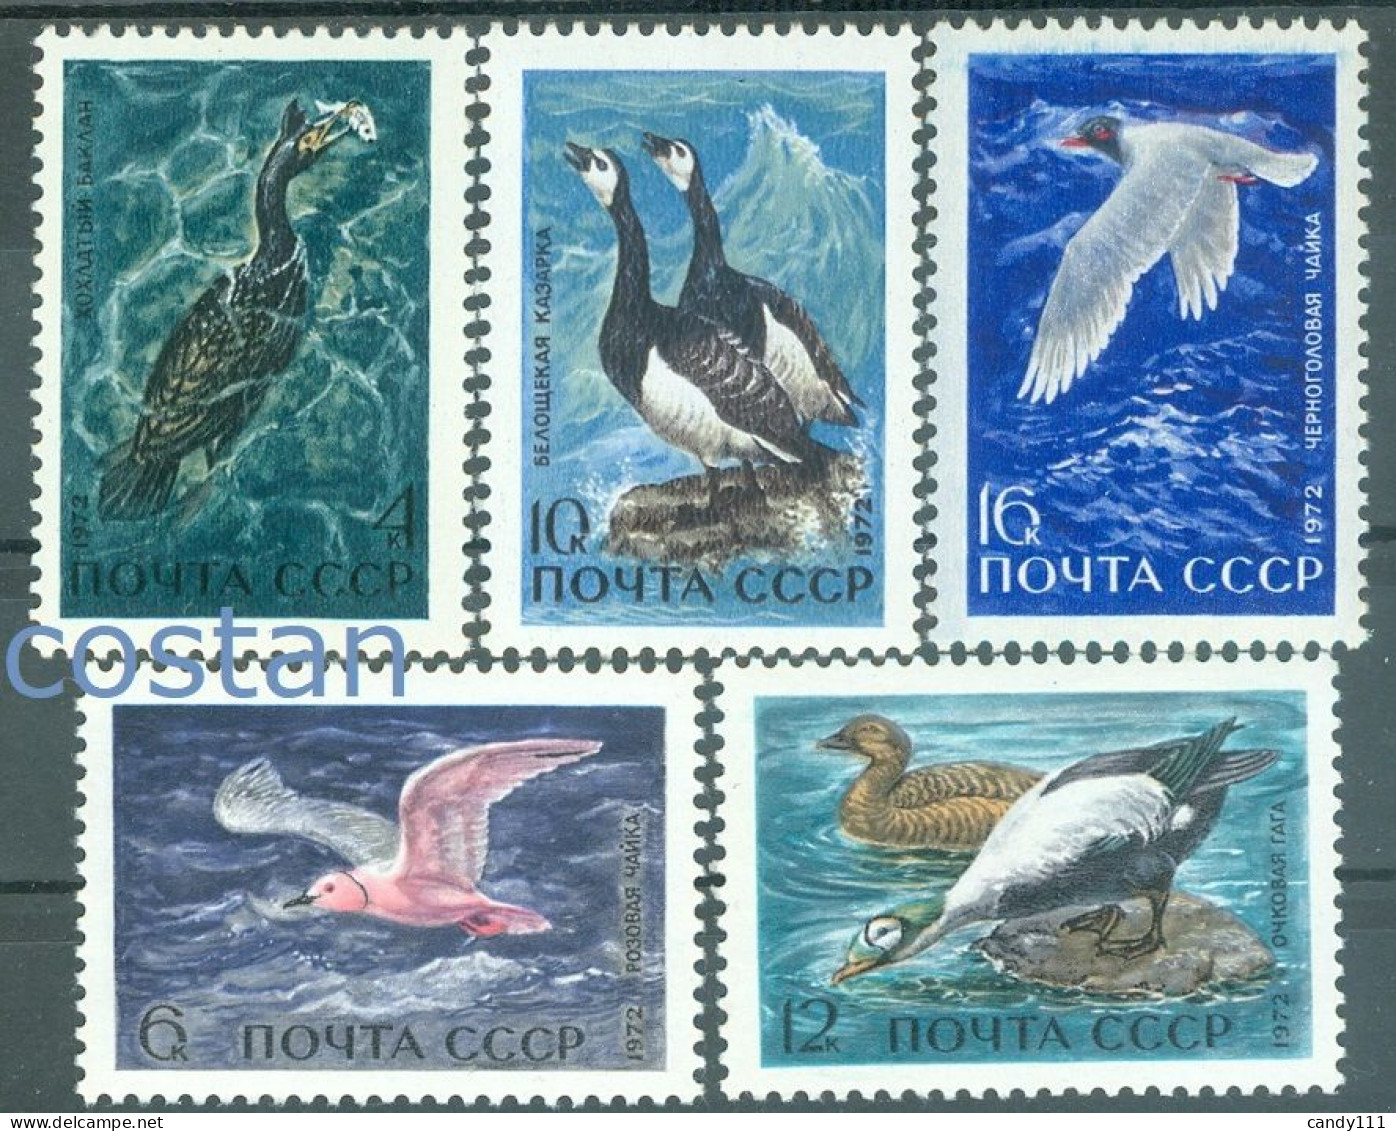 1972 Seabird,Ross's Gull,barnacle Goose,spectacled Eider,cormorant,Russia3974MNH - Mouettes